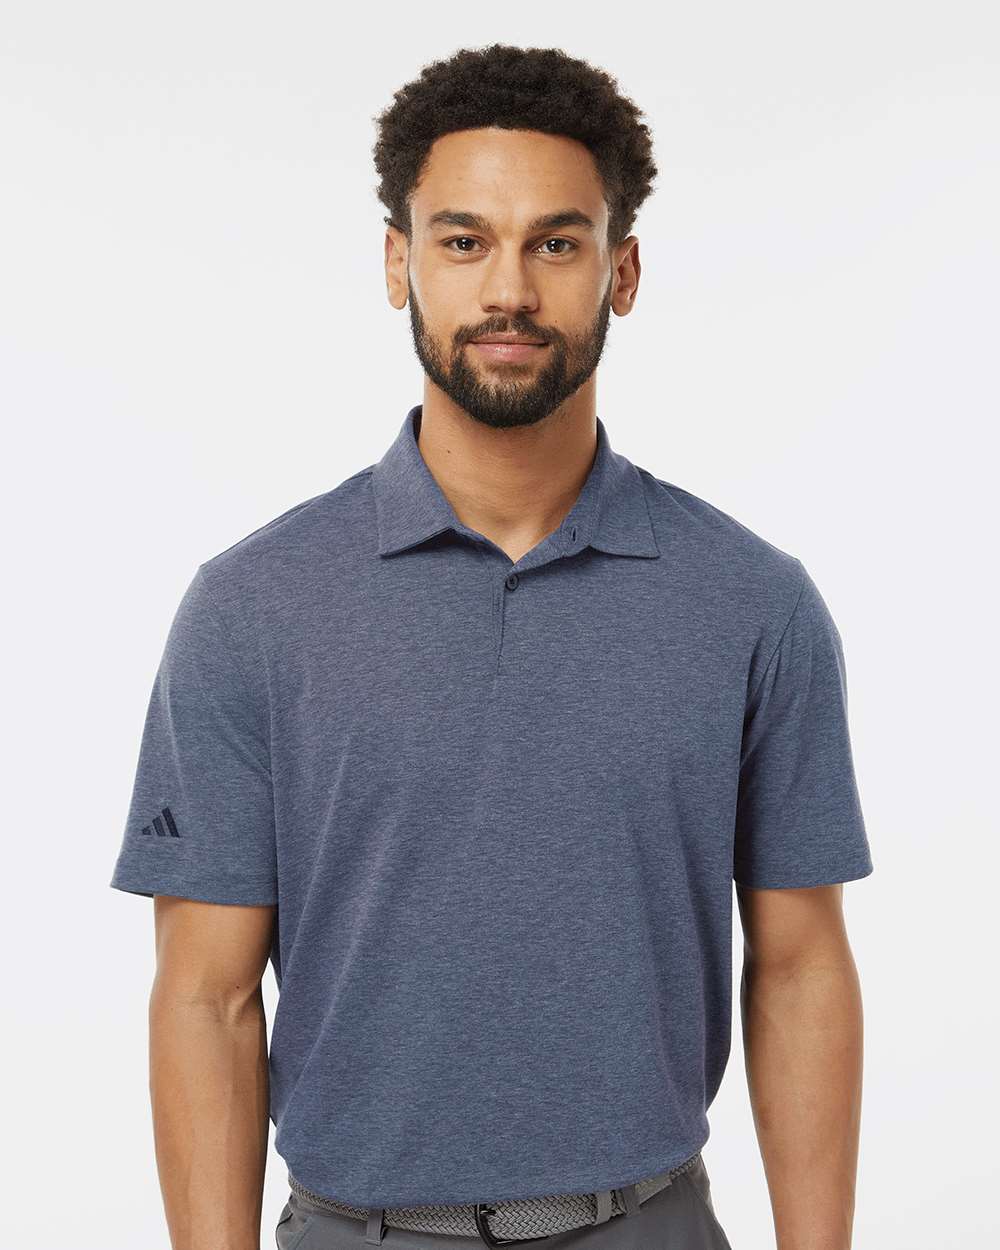 Adidas A590 Blend Polo T-Shirt #colormdl_Collegiate Navy Melange